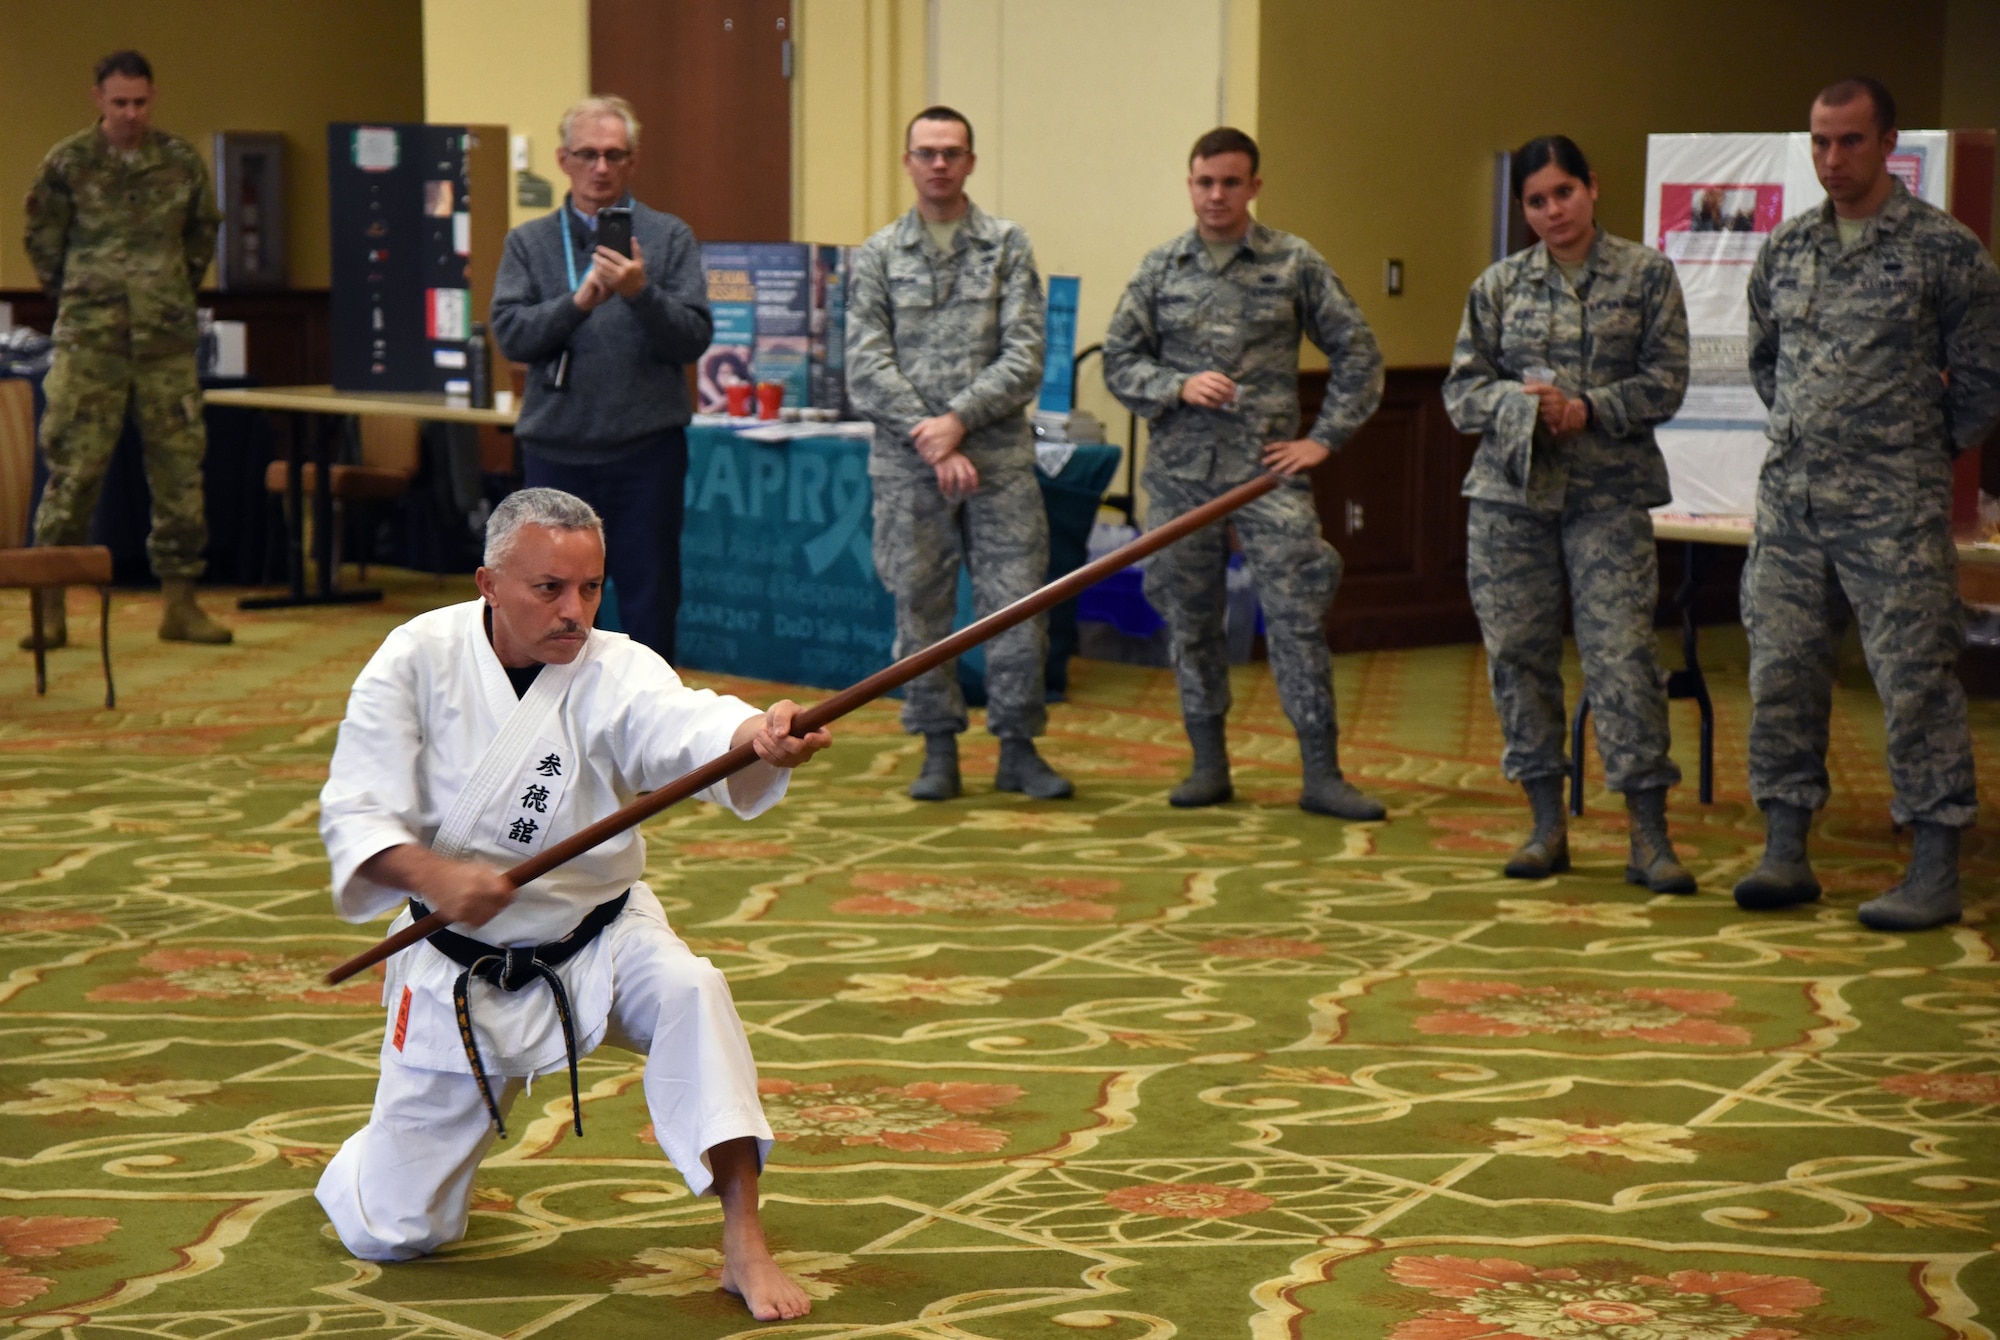 Alfred Rivera, Okinawa Kenpo Mushin Ryu instructor, provides a karate demonstration during Diversity Day inside the Bay Breeze Event Center at Keesler Air Force Base, Mississippi, Nov. 13, 2018. The celebration also included food sampling and information booths about countries around the world. (U.S. Air Force photo by Kemberly Groue)